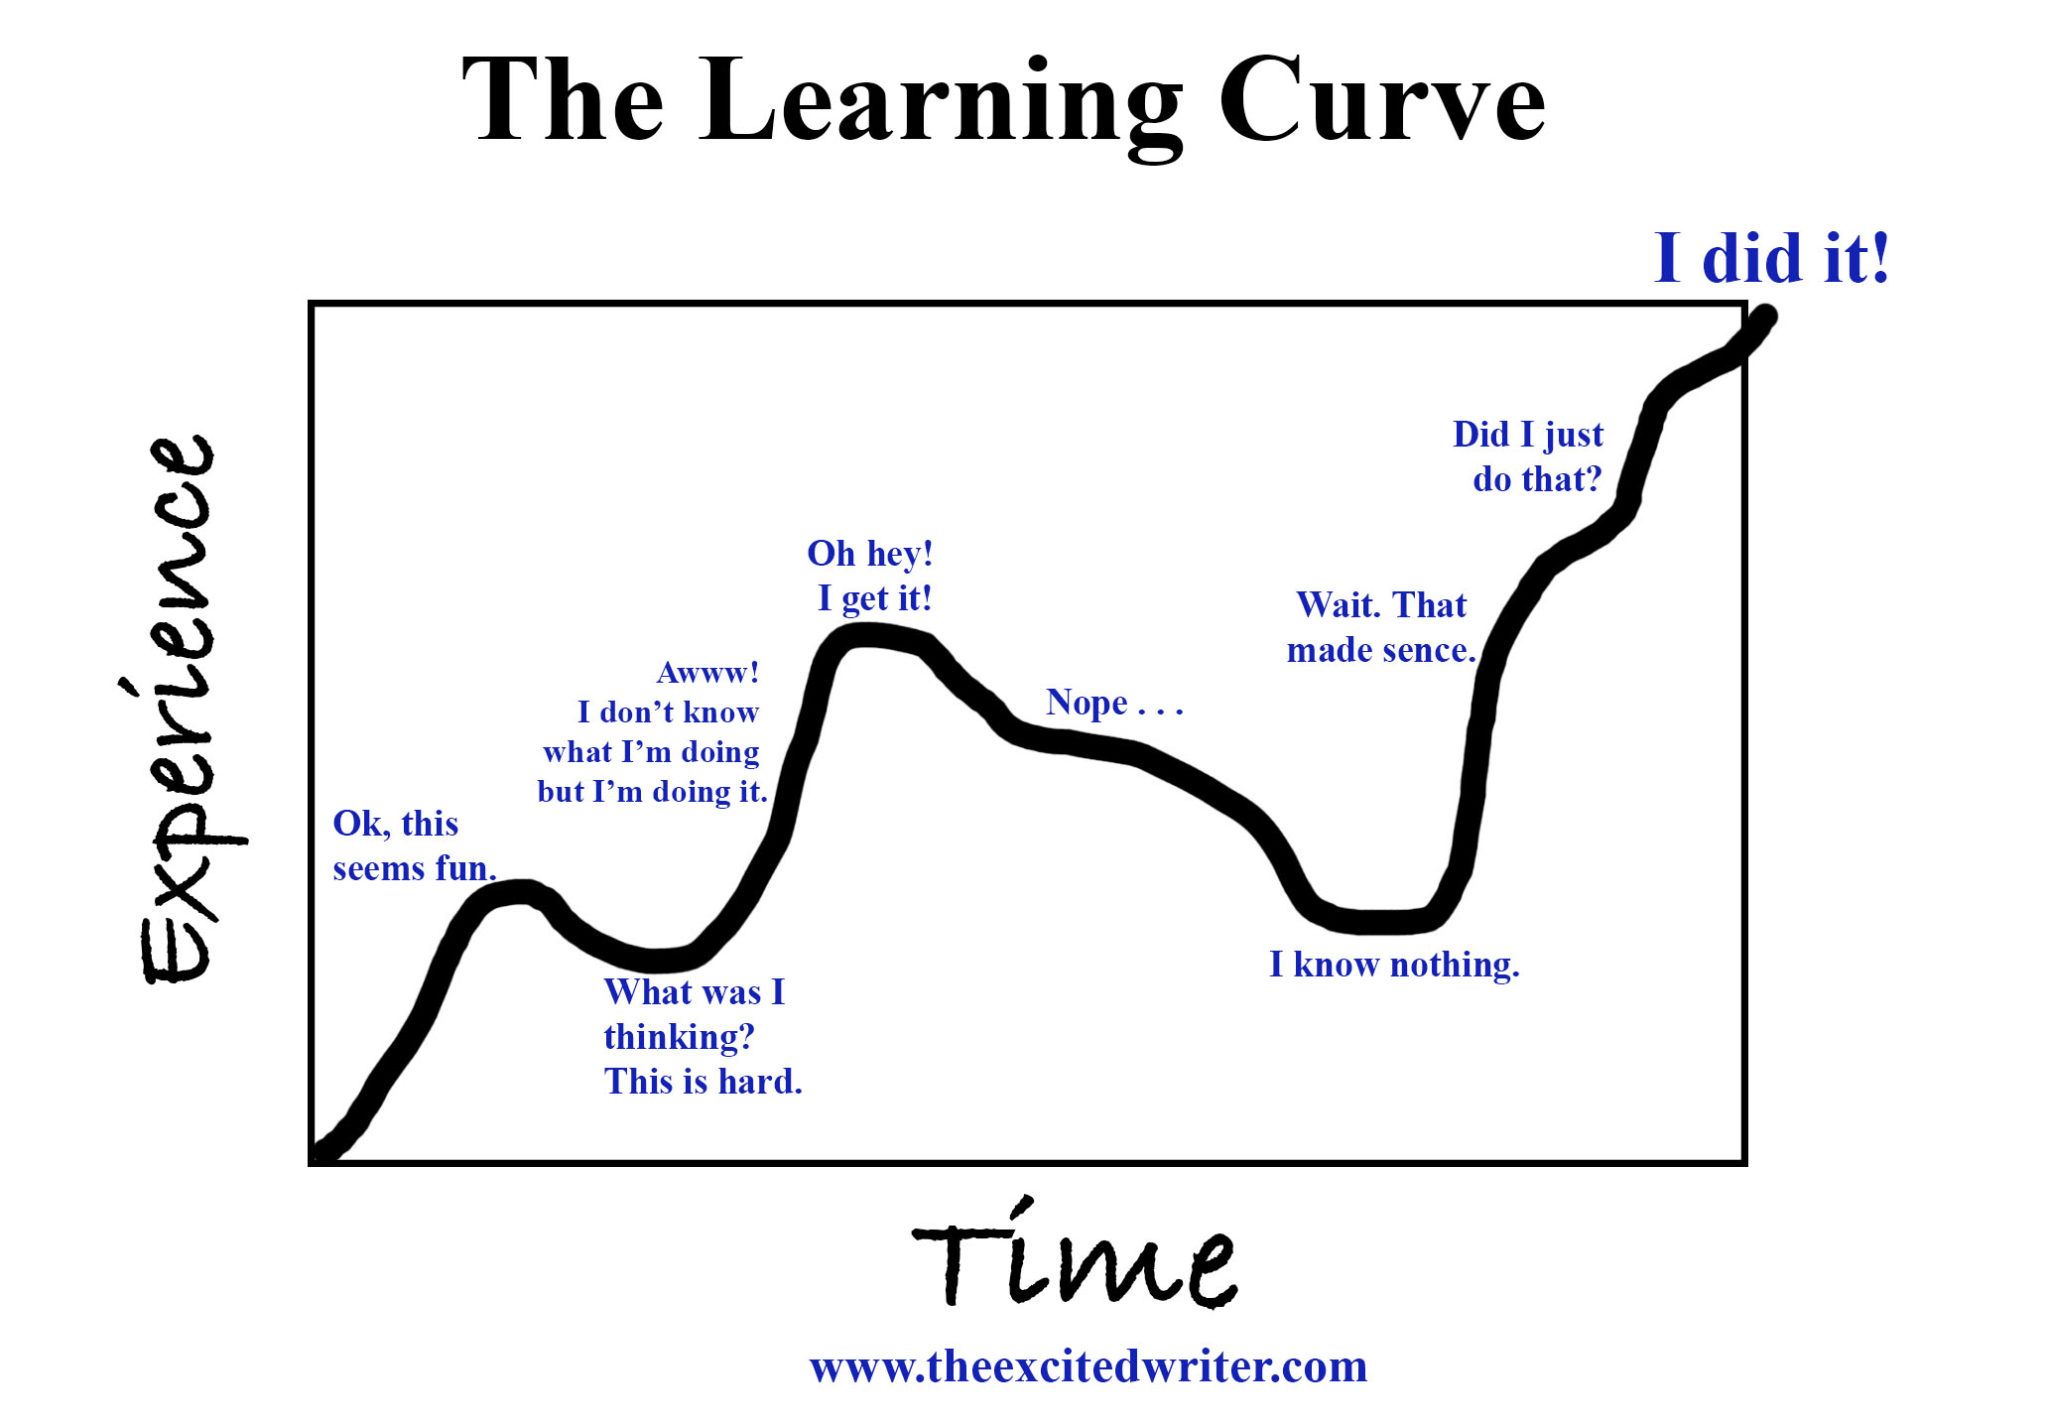 thelearningcurve.jpg